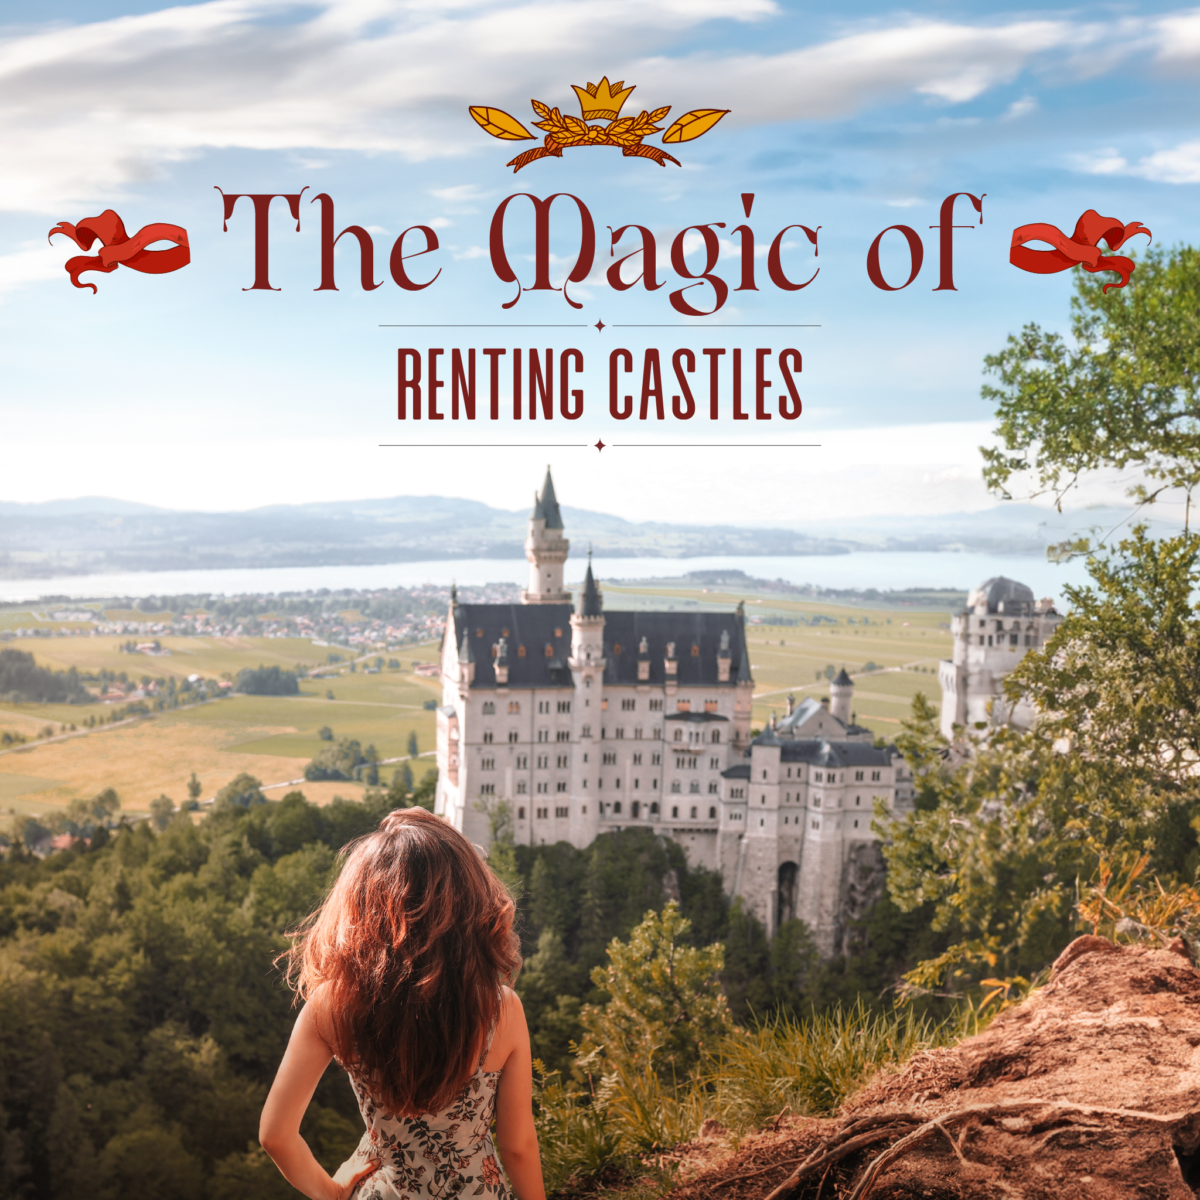 The magic of renting castles